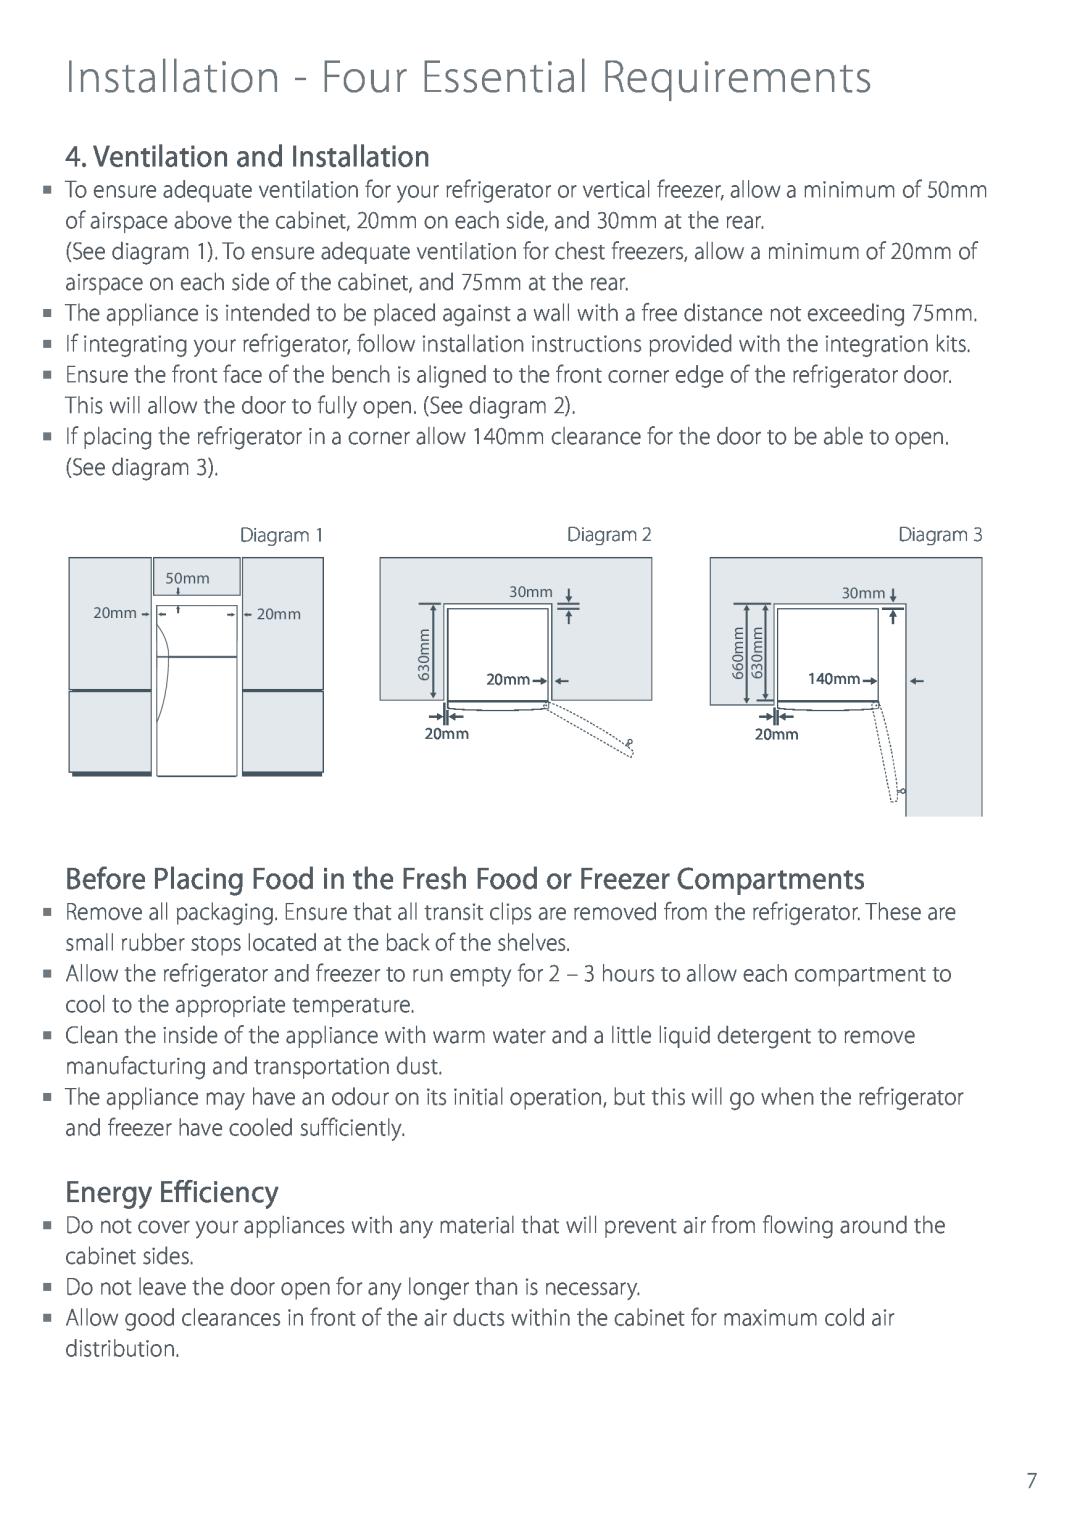 Fisher & Paykel Refrigerator & Freezer manual Ventilation and Installation, Energy Efficiency, Diagram 